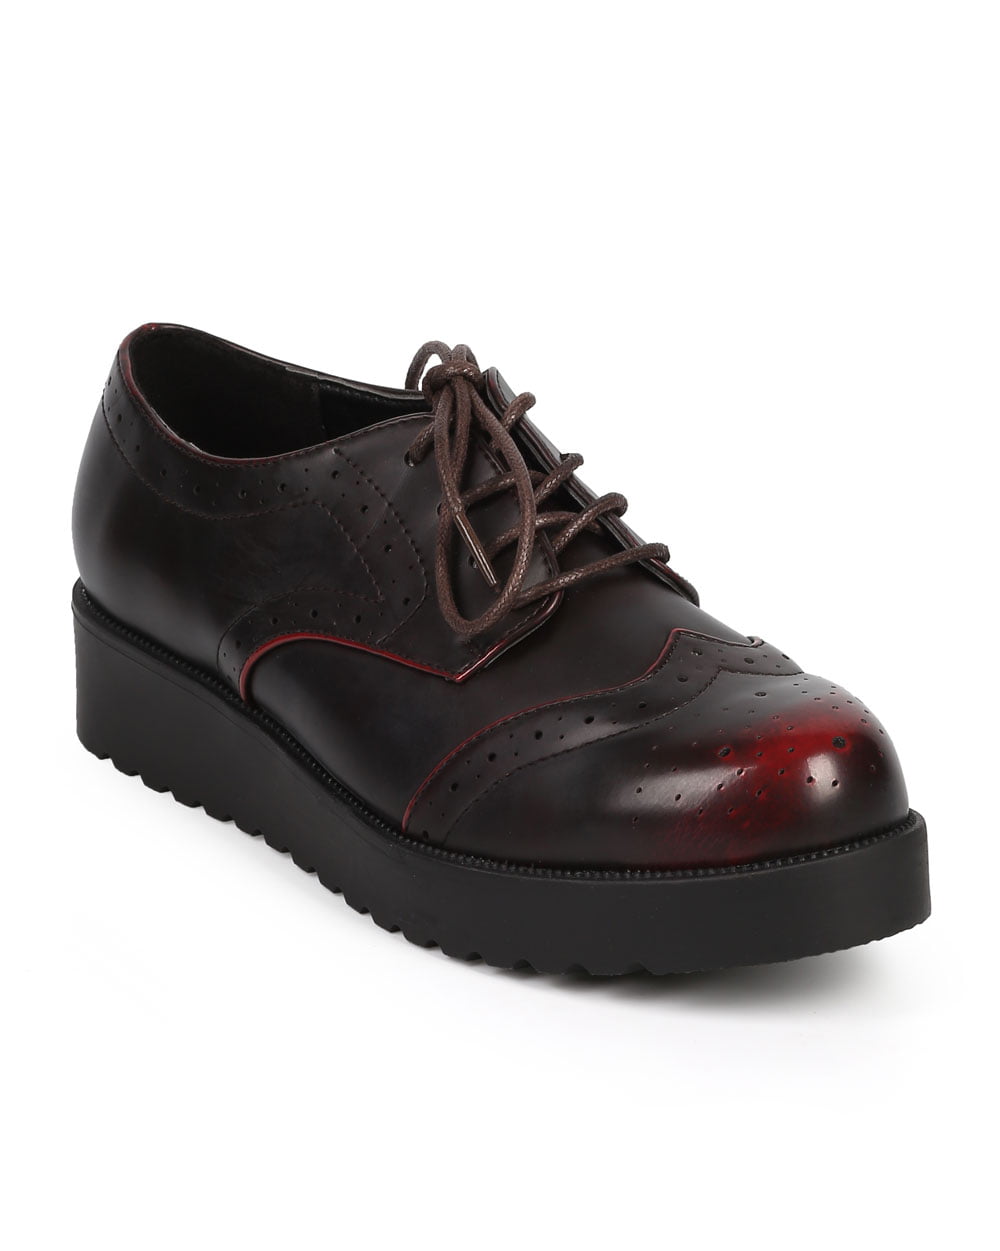 Womens Lace up Patent Leather Brouge Shoes Platform Creeper Oxford Med Heel Pump 